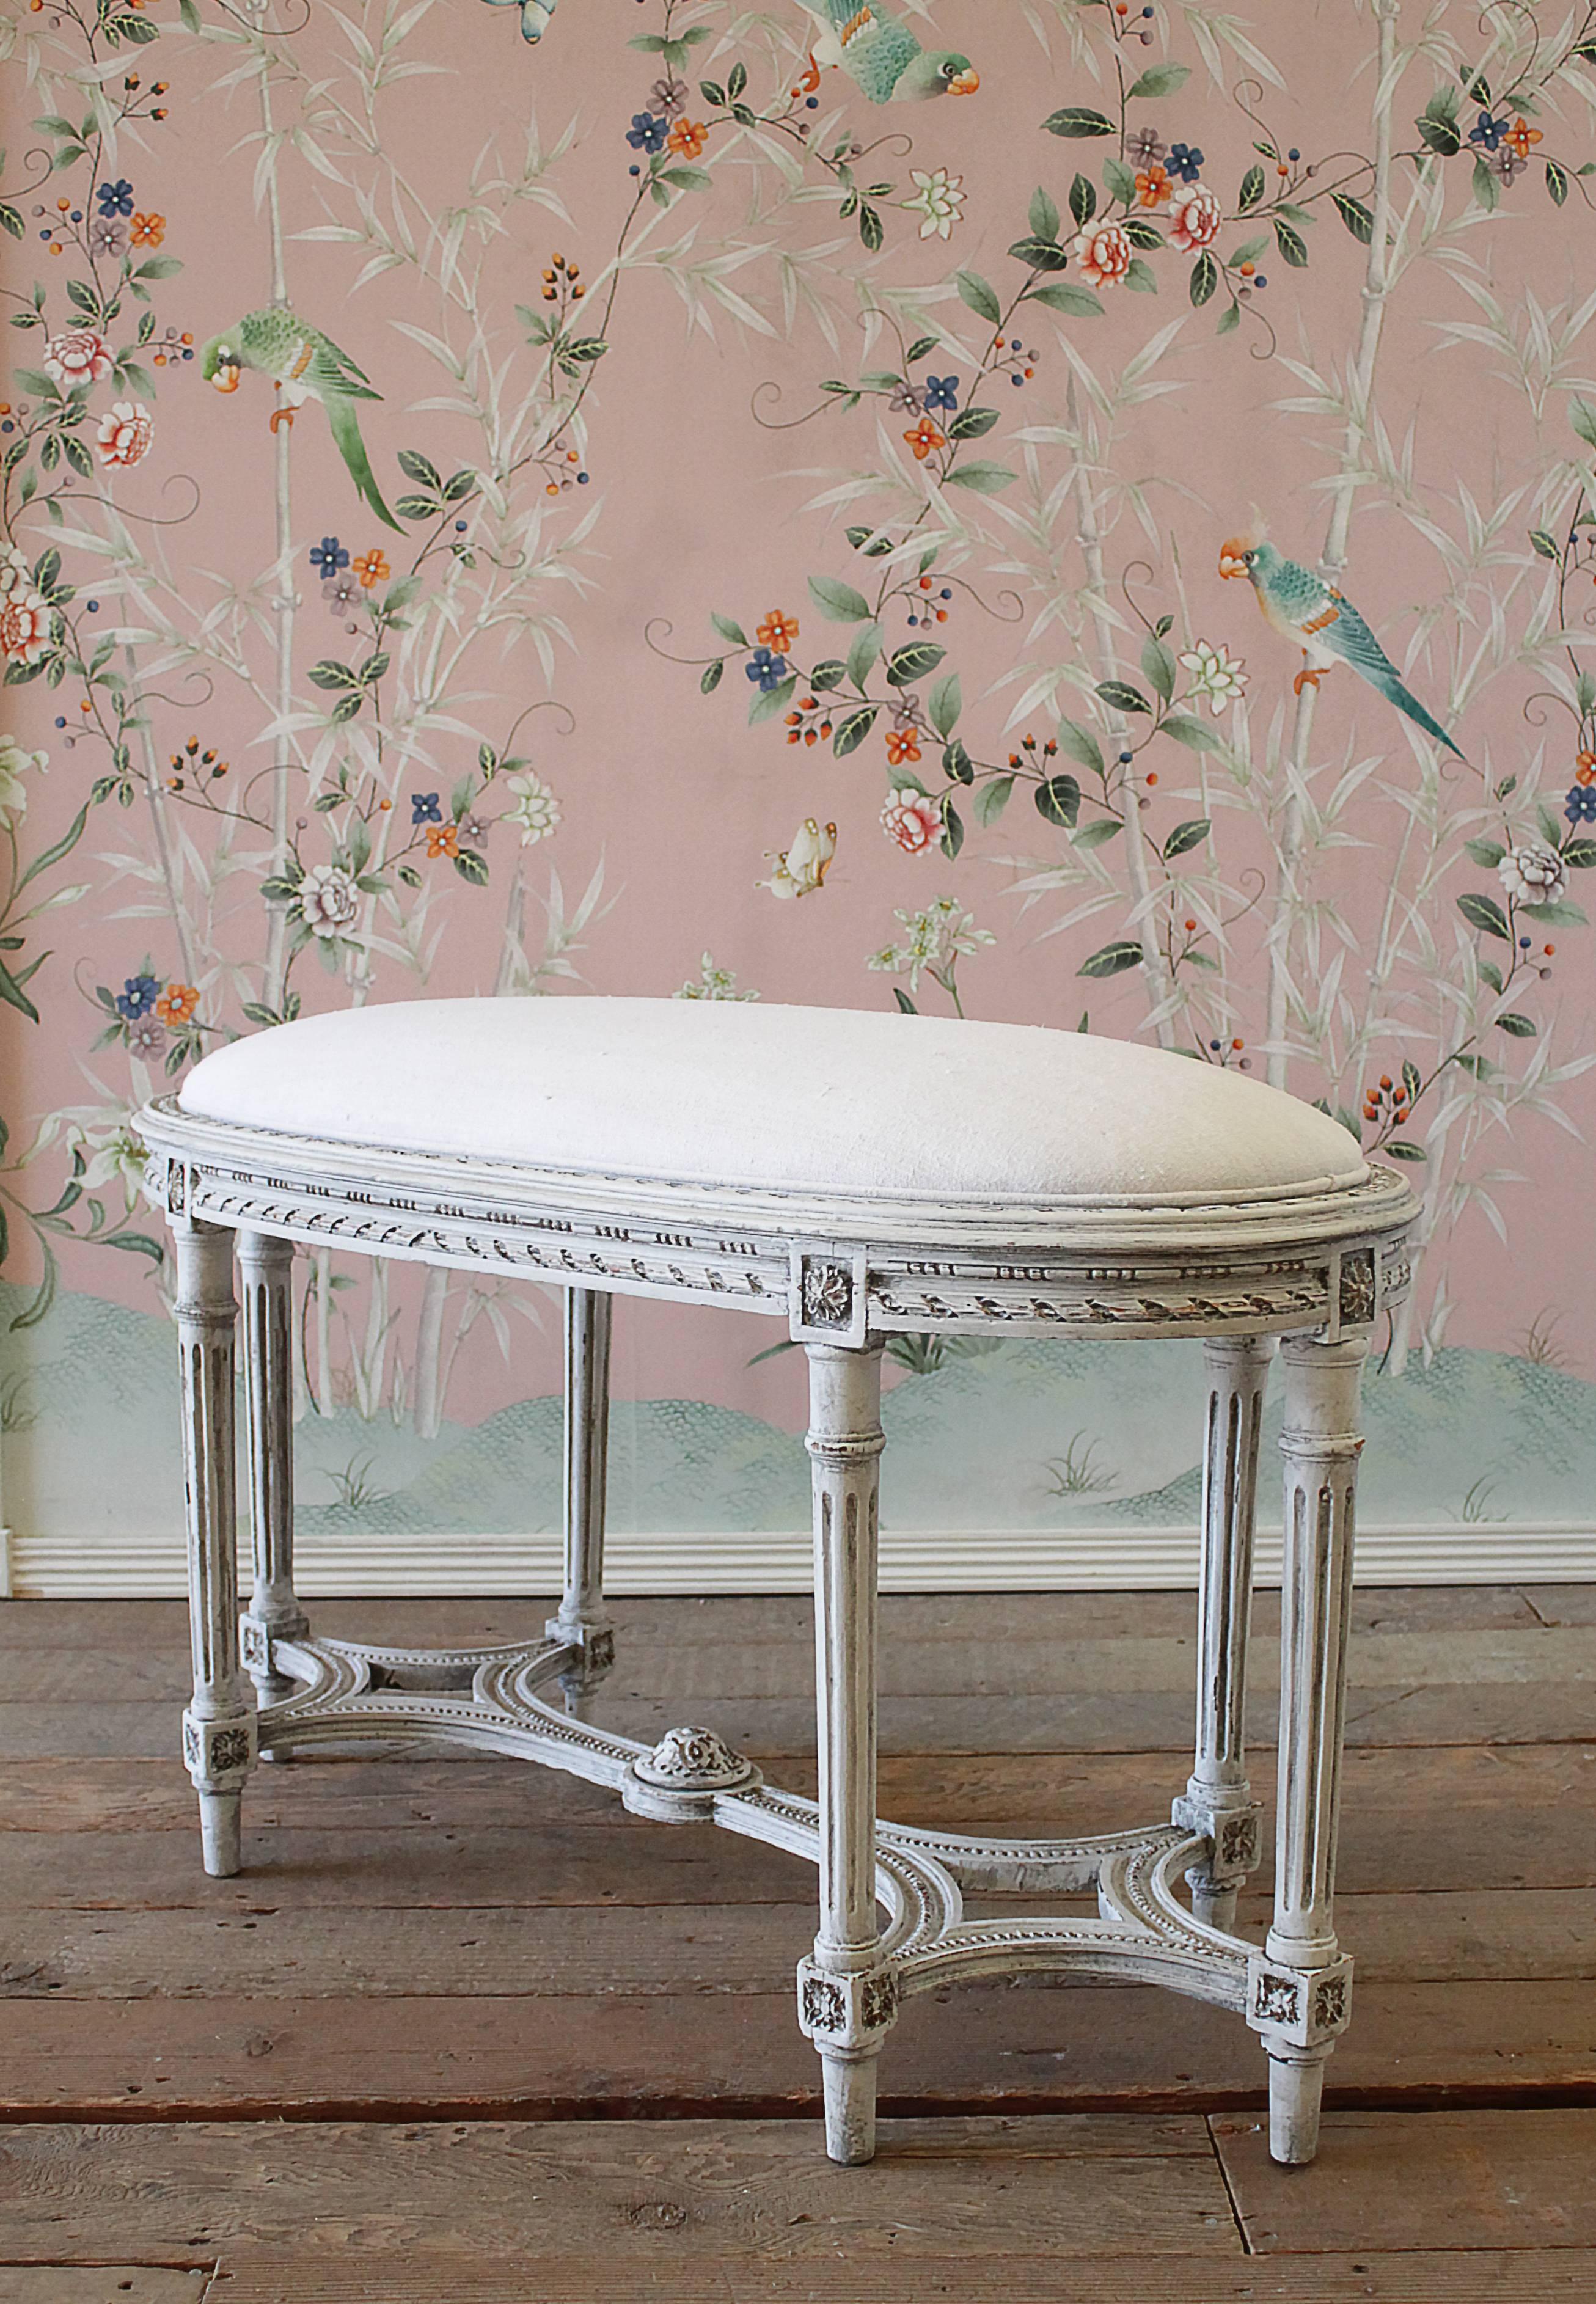 Antique Louis XVI style upholstered oval bench with six legs. Finished in our antique oyster white, with subtle areas of distressed edges, and finished with an antique glaze, to give the look of a time worn patina. We reupholstered this in 100 year